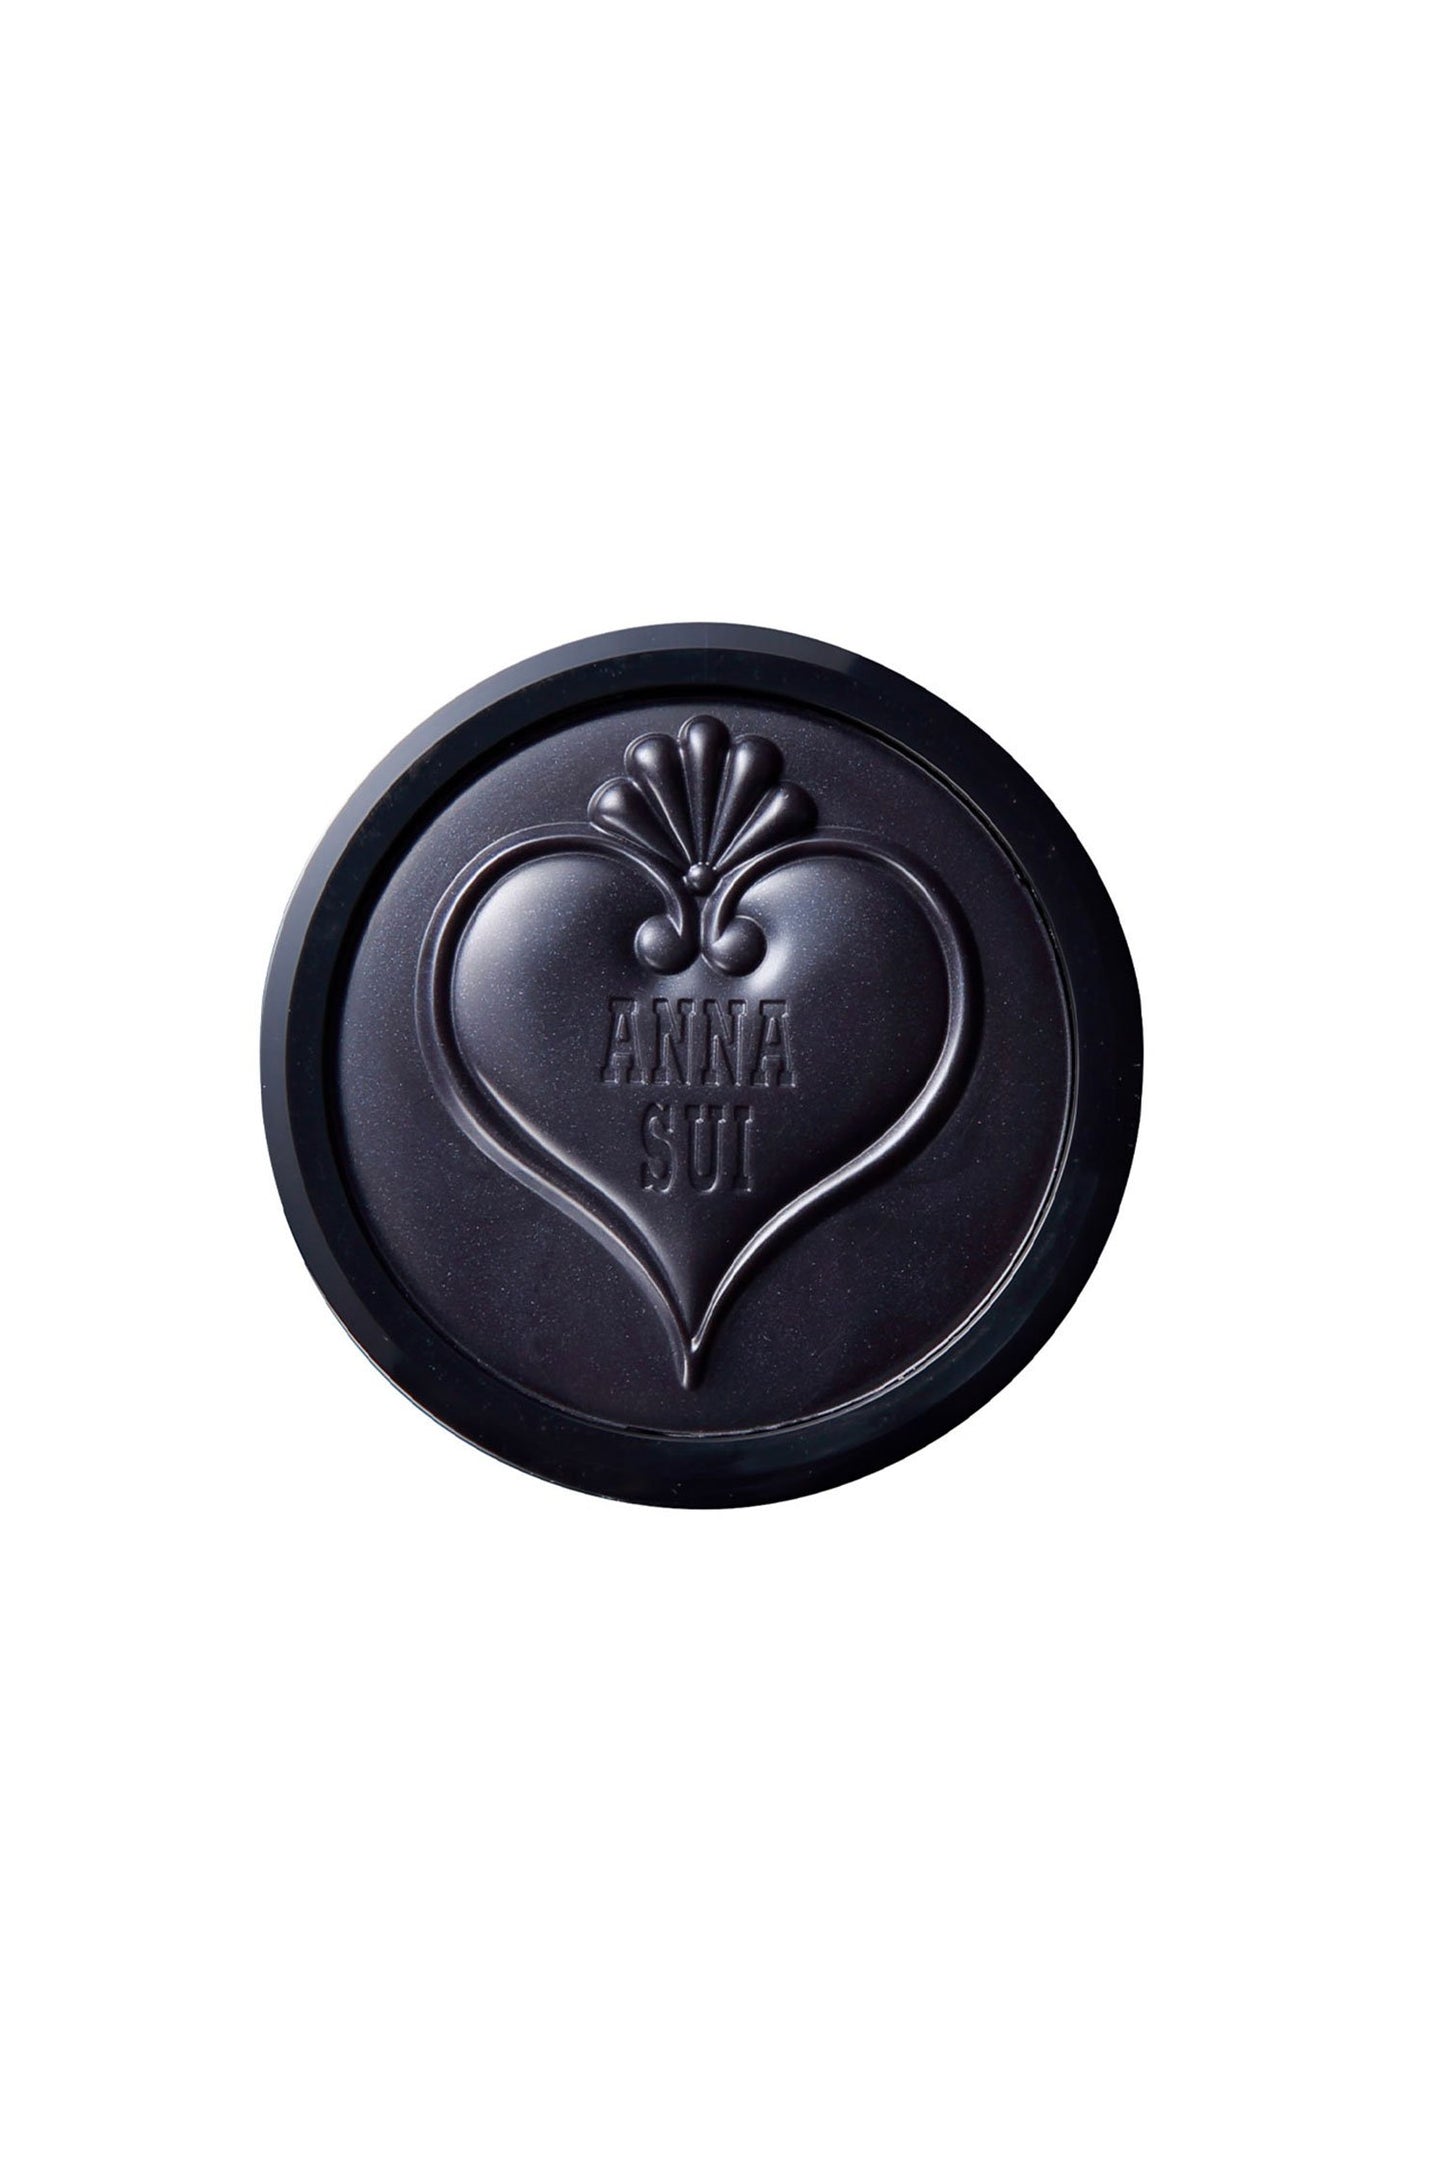 Black round heart-shaped, seashell on top, lid with Anna Sui label cover the top of cream blush